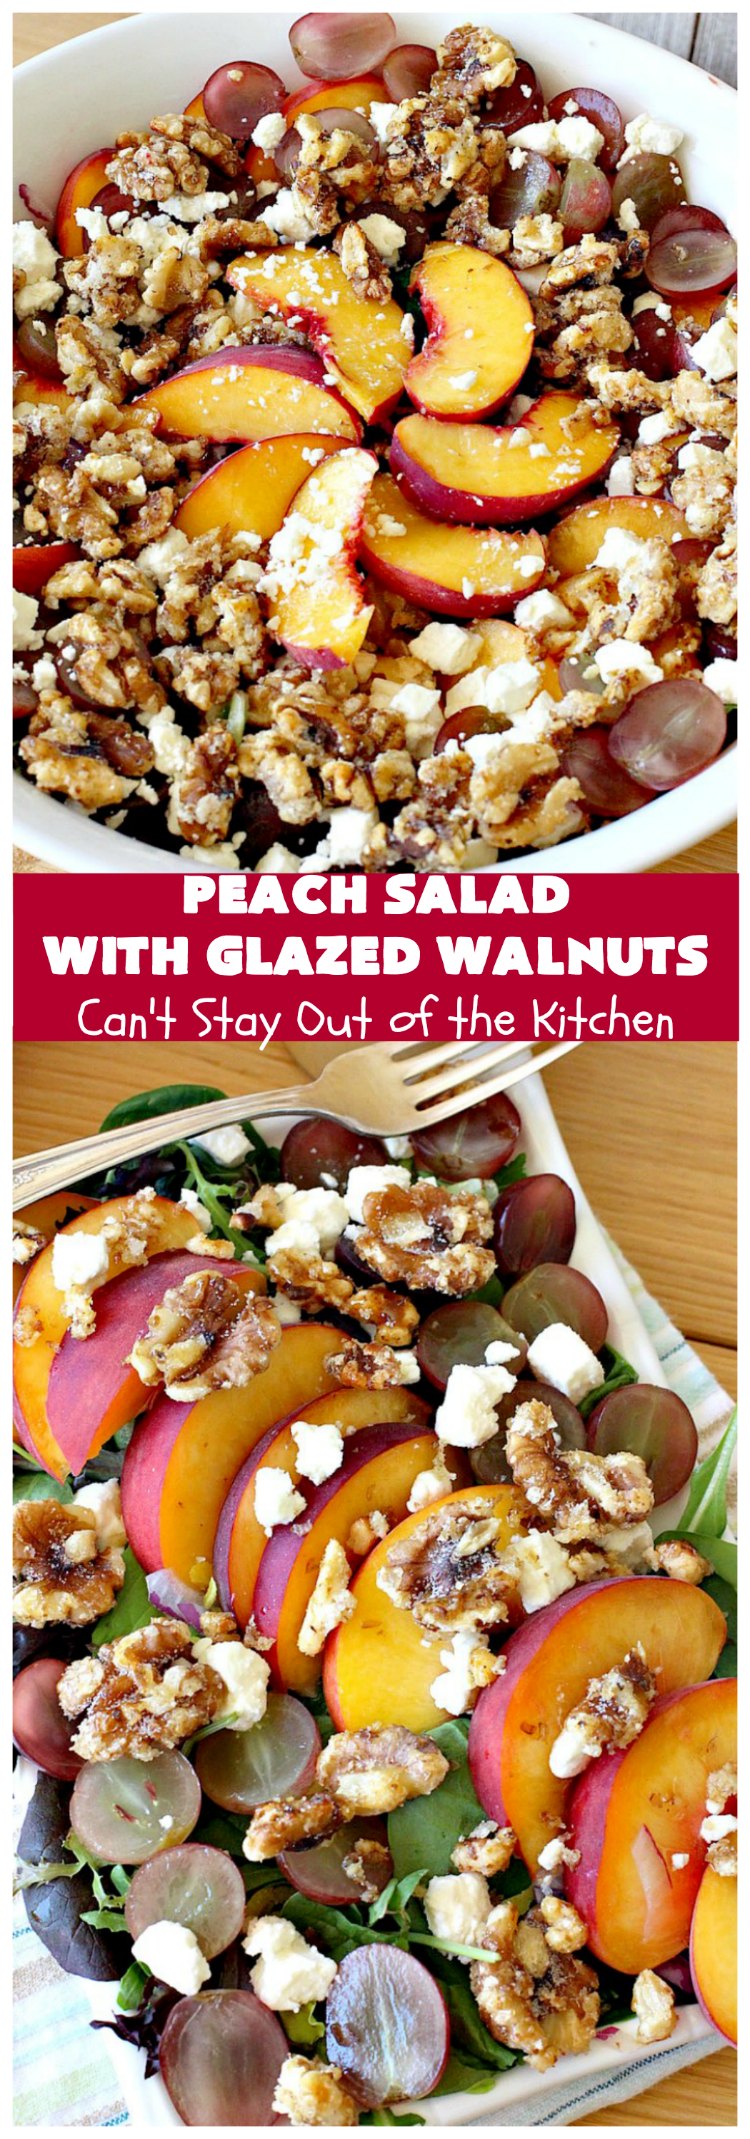 Peach Salad with Glazed Walnuts | Can't Stay Out of the Kitchen